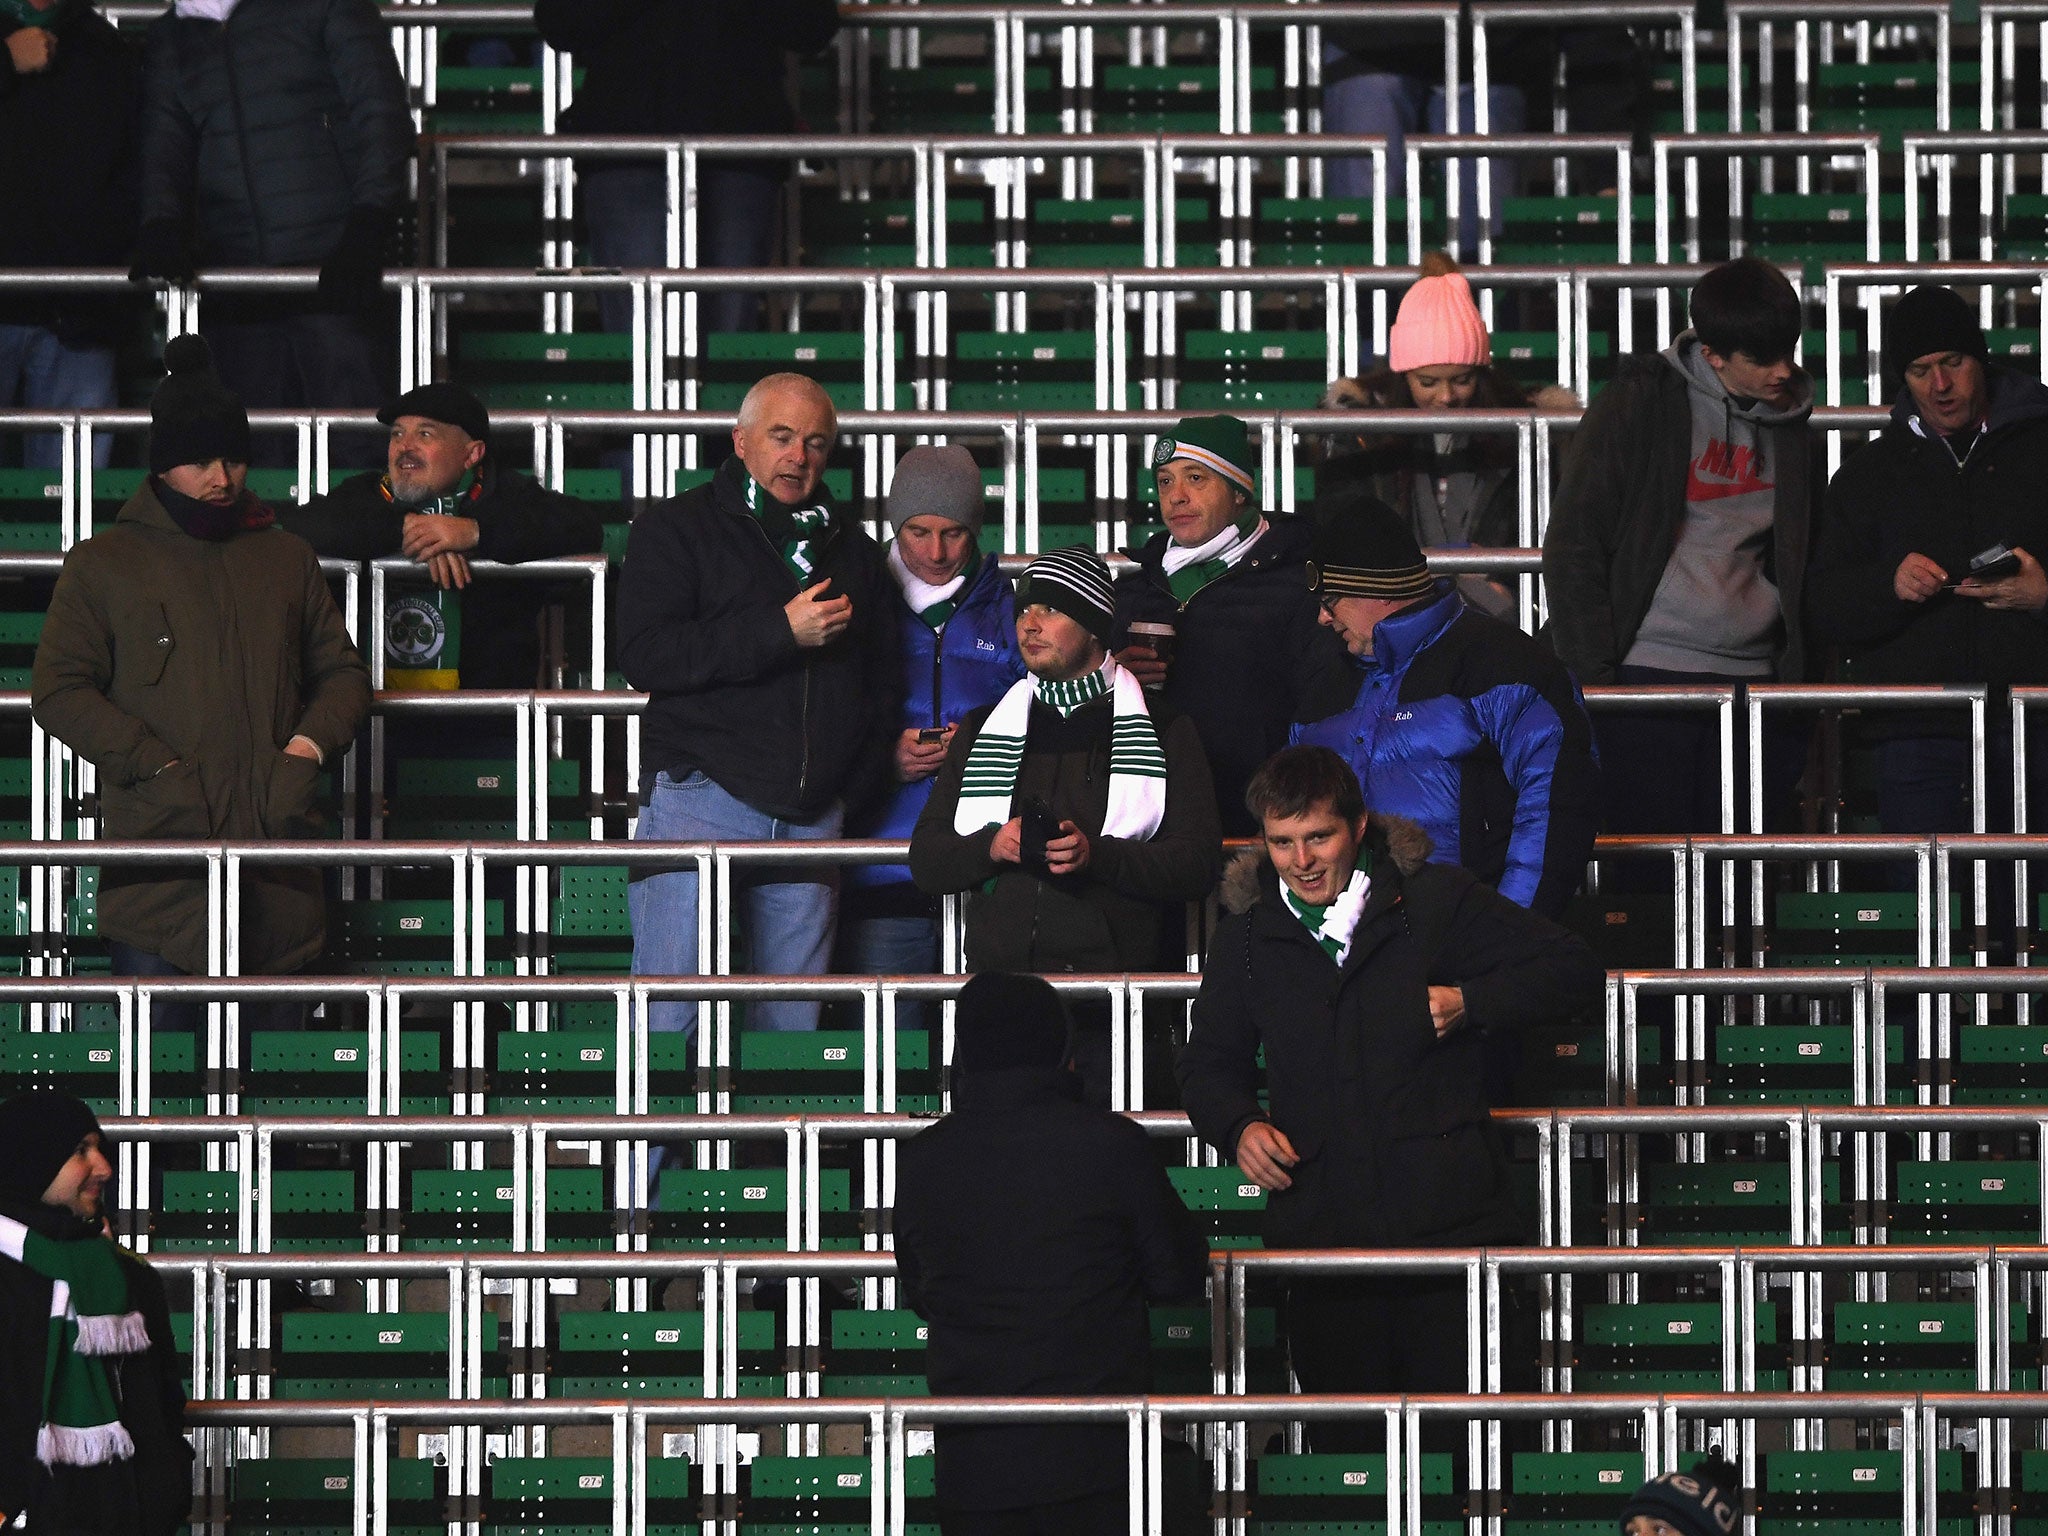 Safe-standing has been successfully introduced at Celtic Park